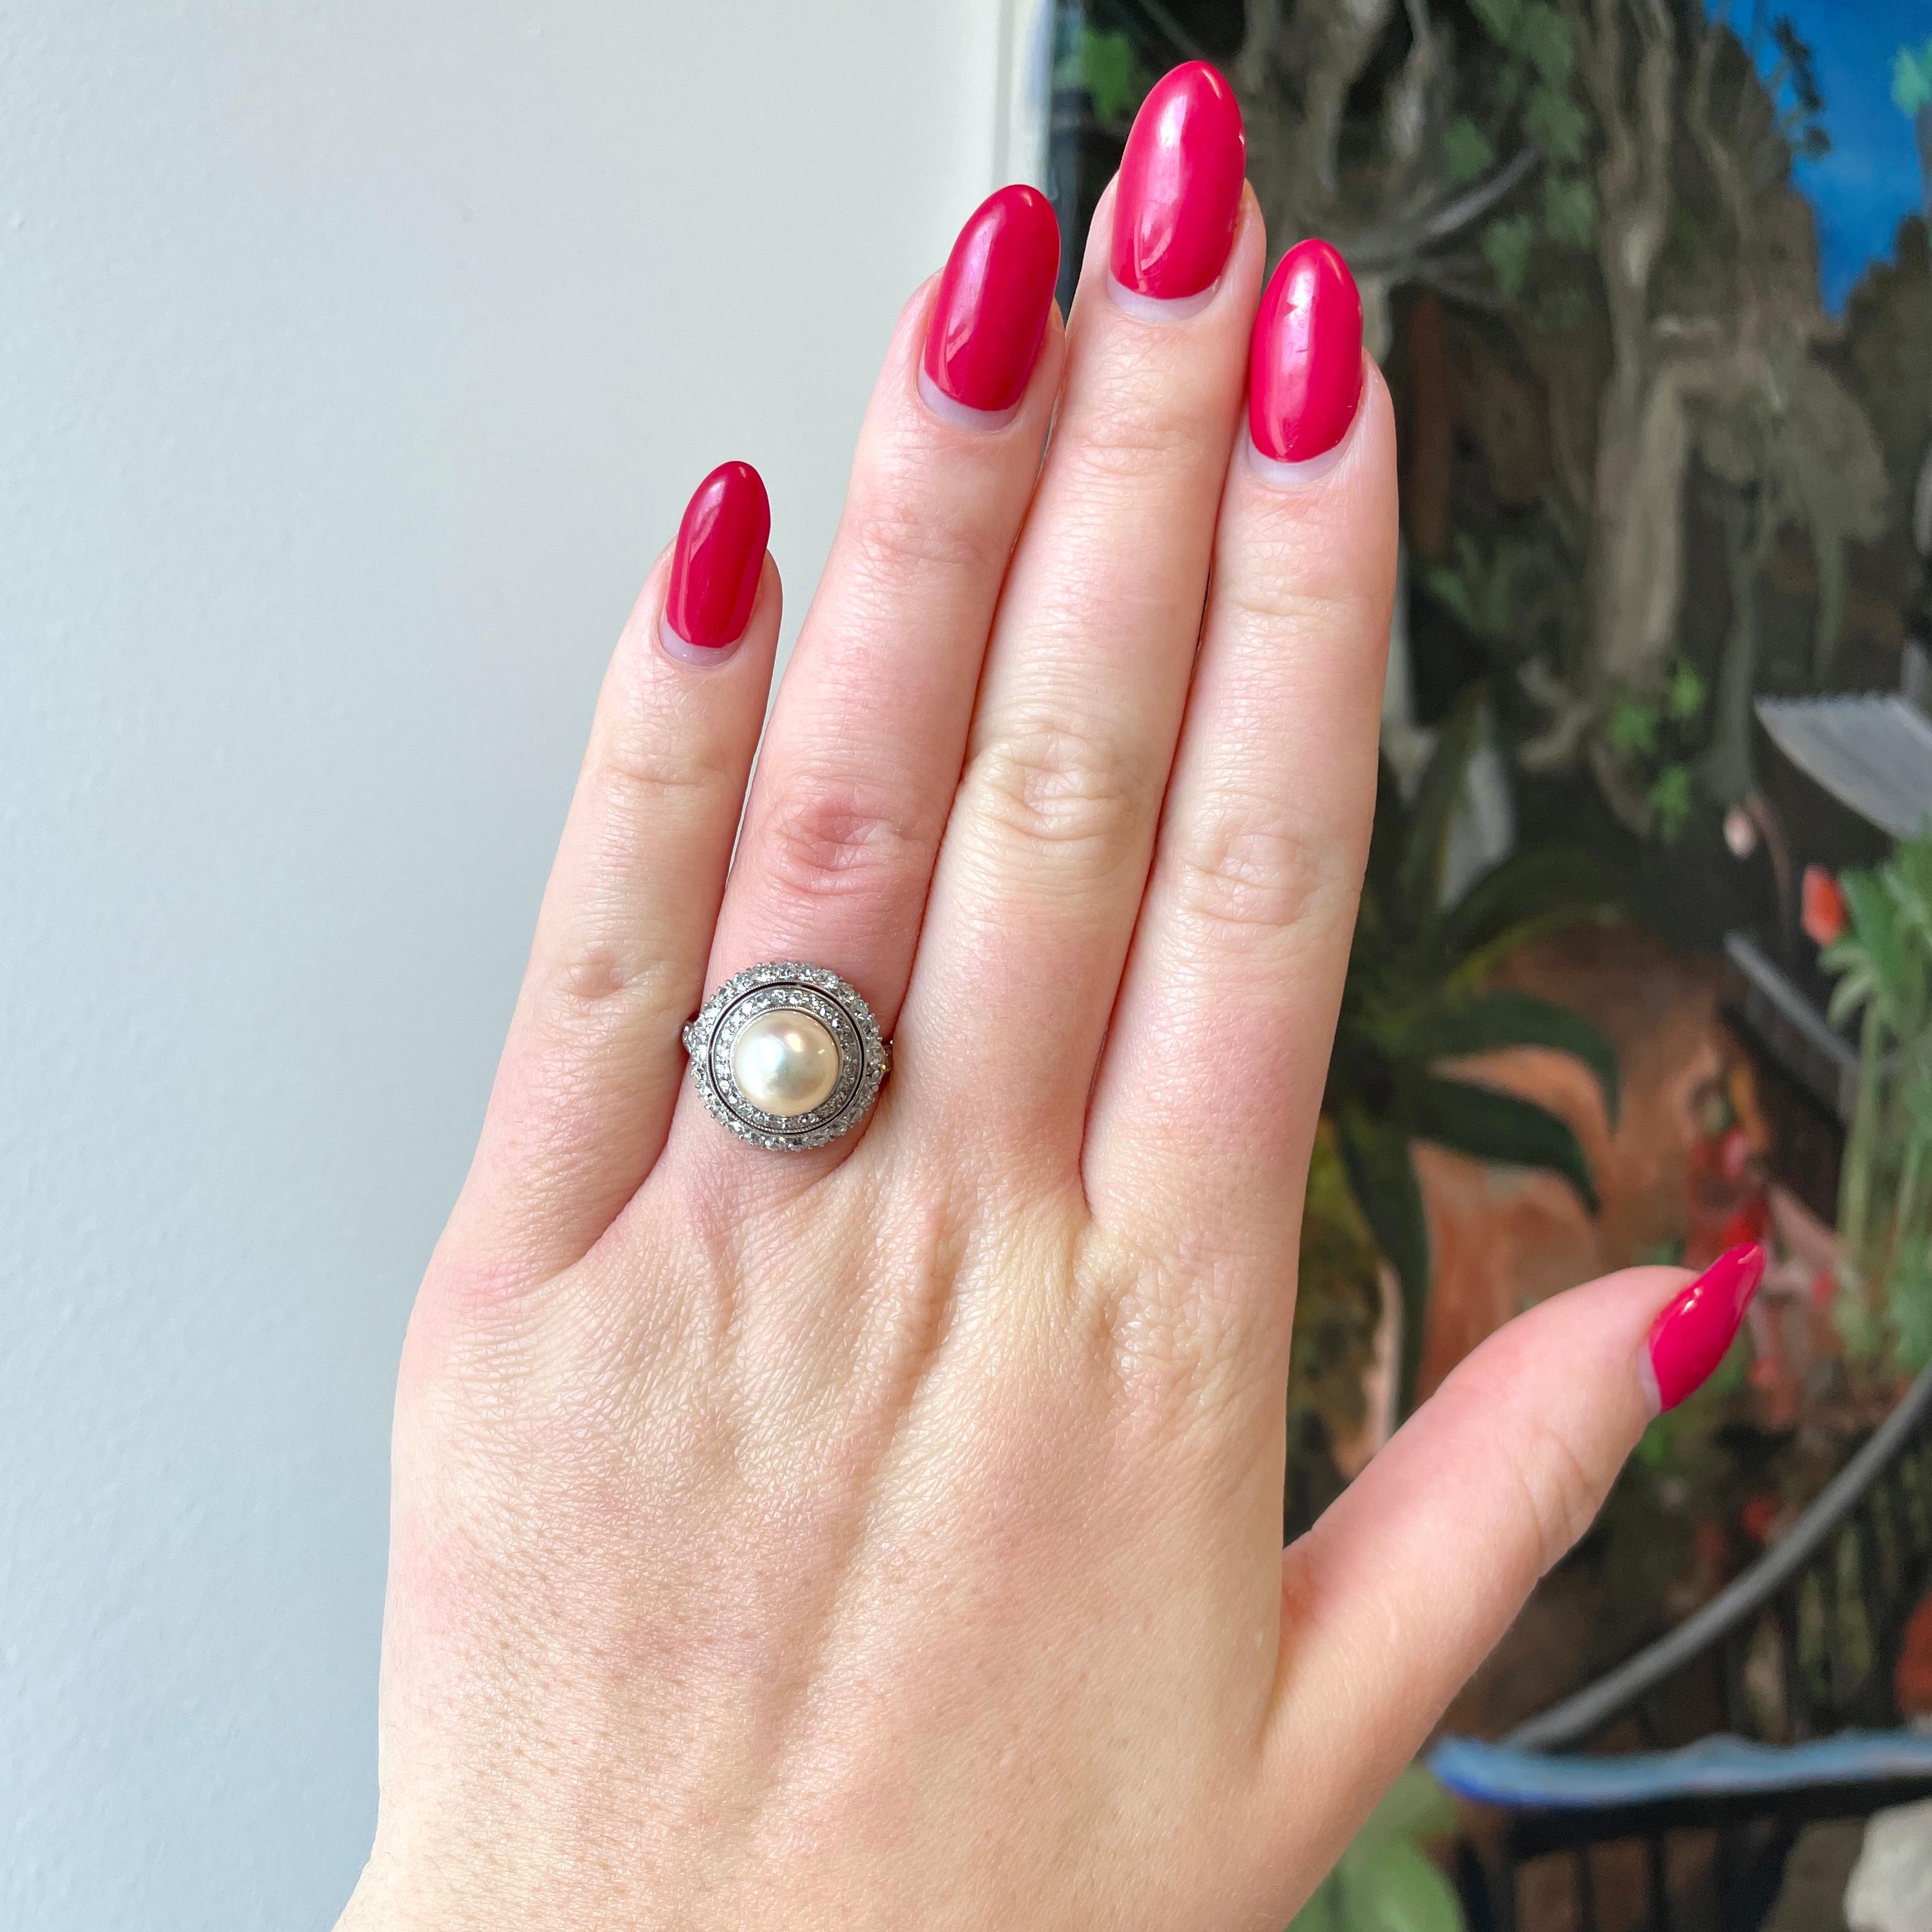 You'll love wearing this stunning Antique Edwardian GIA Pearl Diamond Platinum Cluster Ring. You can be elegant or dressed down and today pearls are actively used in fashion as a unique, stylish and elegant accent. This ring is extremely feminine